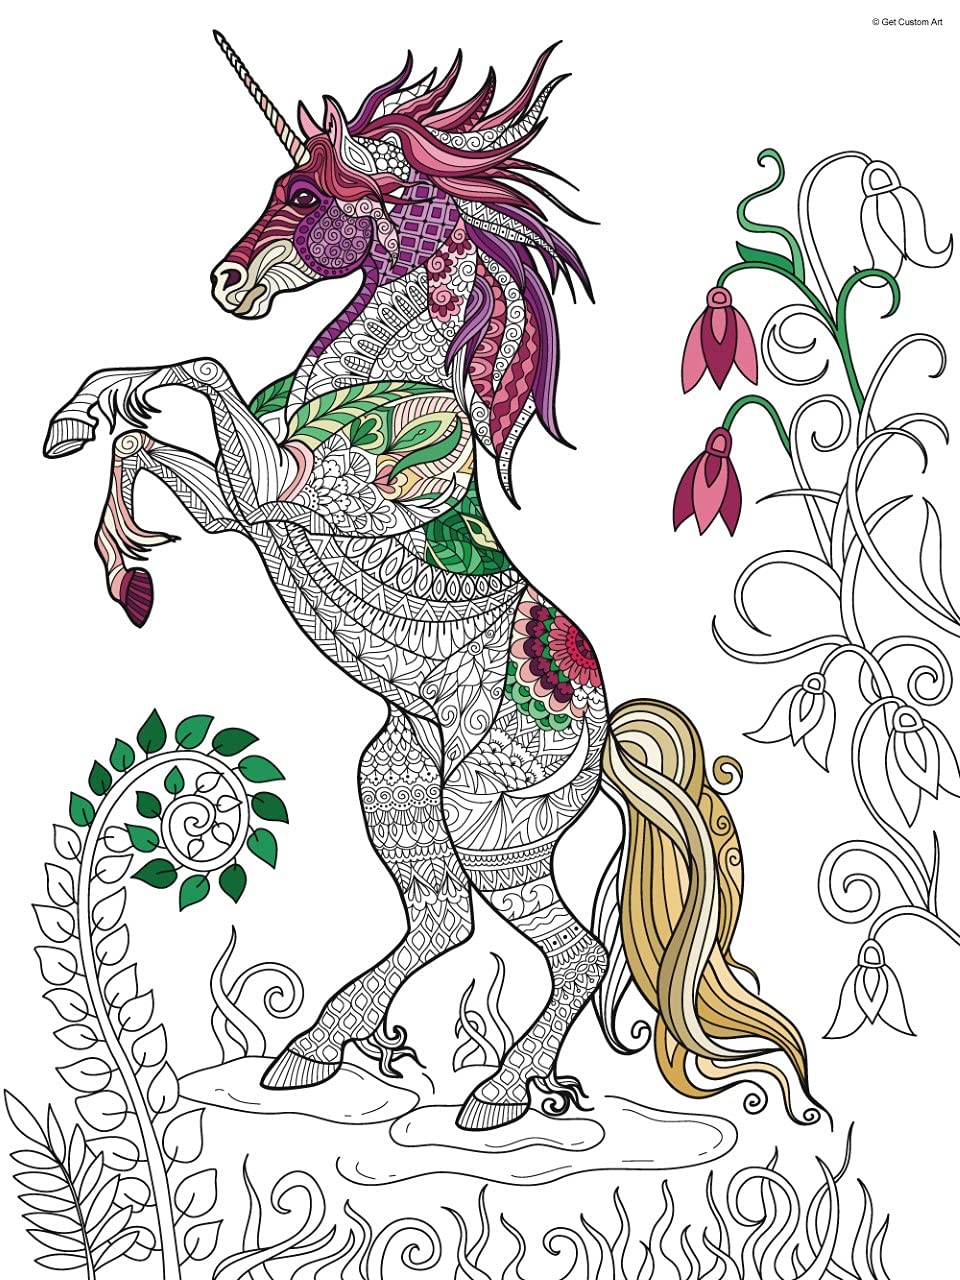 Fantasy Unicorn Coloring Poster – Animal Art for Kids and Adults | DIY Stress Relief Coloring Poster